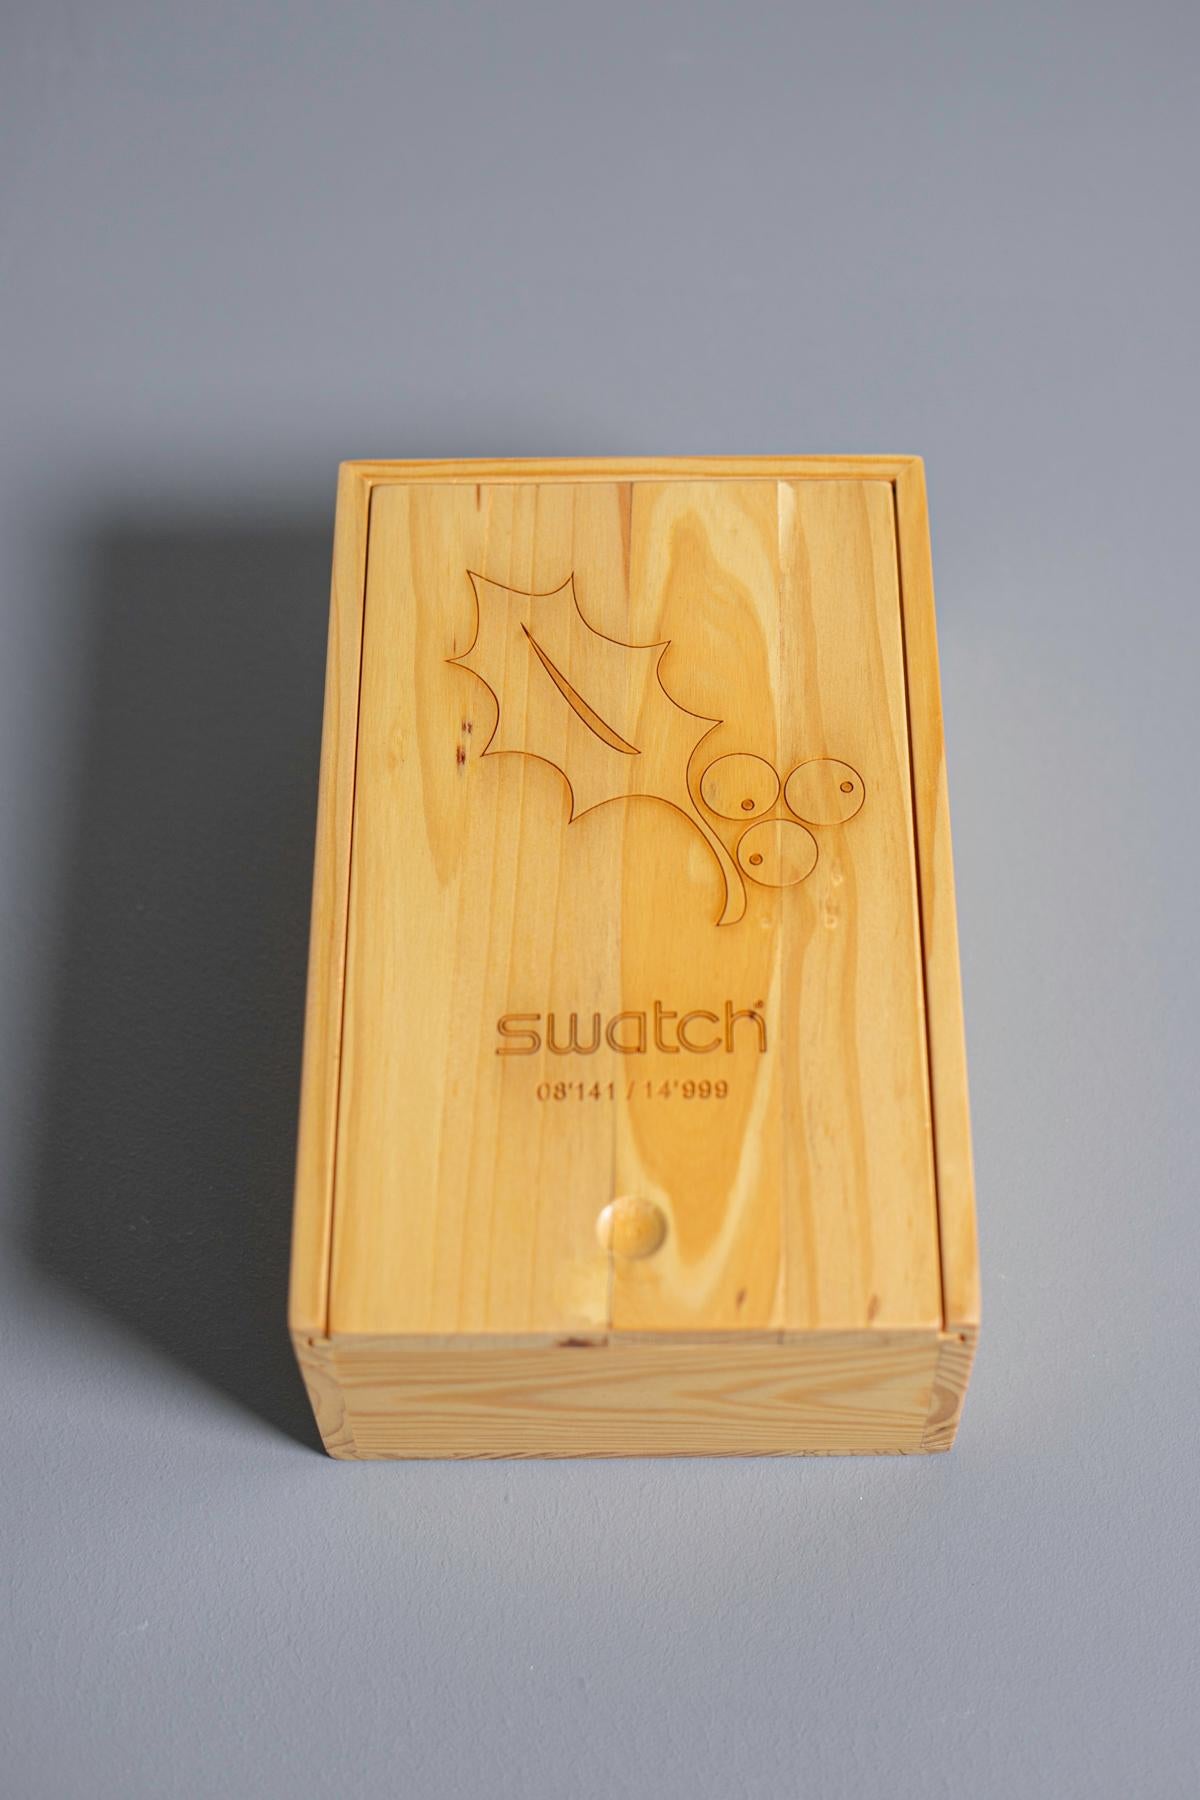 swatch watch packaging